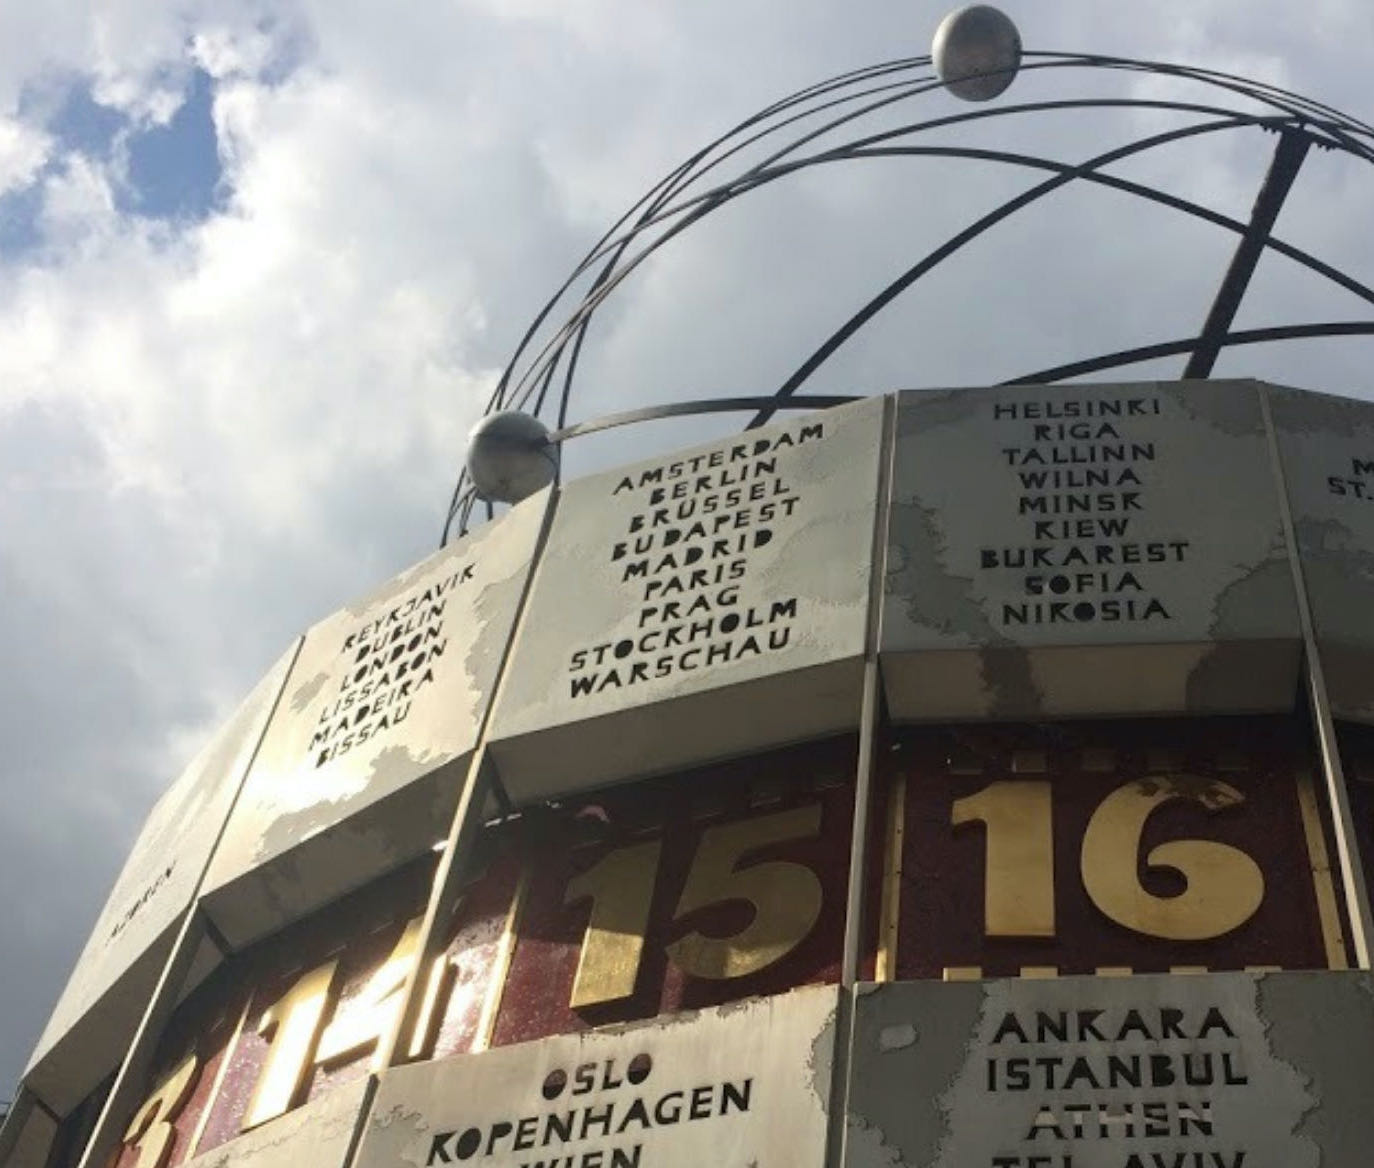 A fragment of the World Clock Statue at Alexanderplatz, Berlin, a large turret-style world clock. Showing the time at the moment for 3 different time zones in Europe